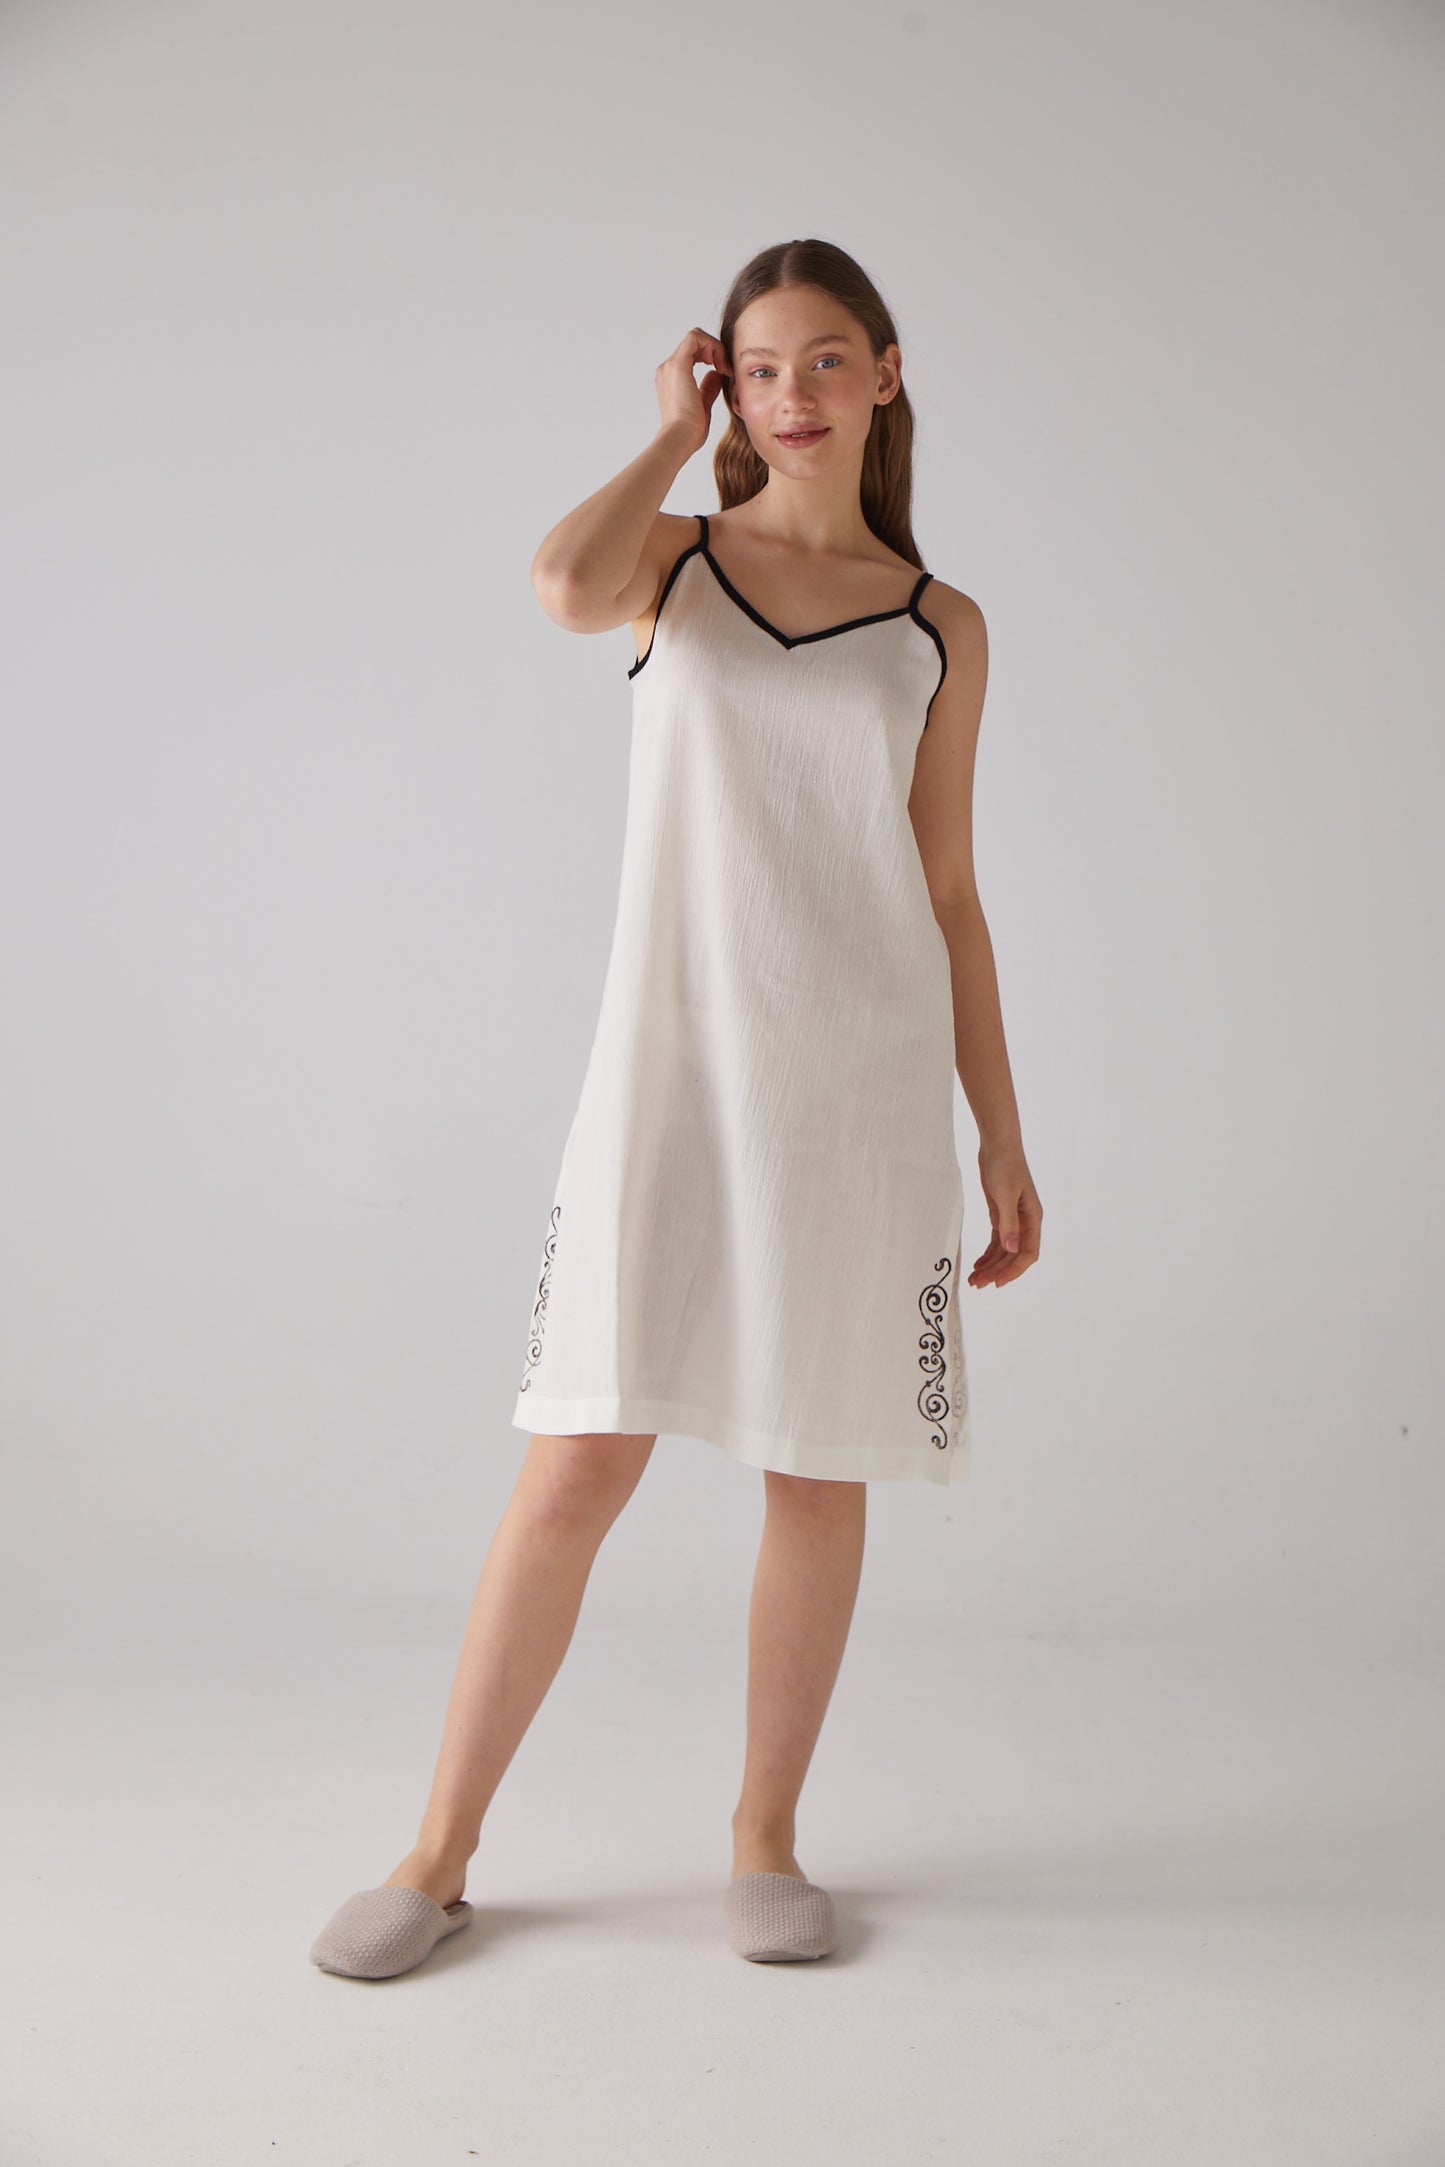 Clef woodcut patterned Strappy nightgown in white 100% organic cotton